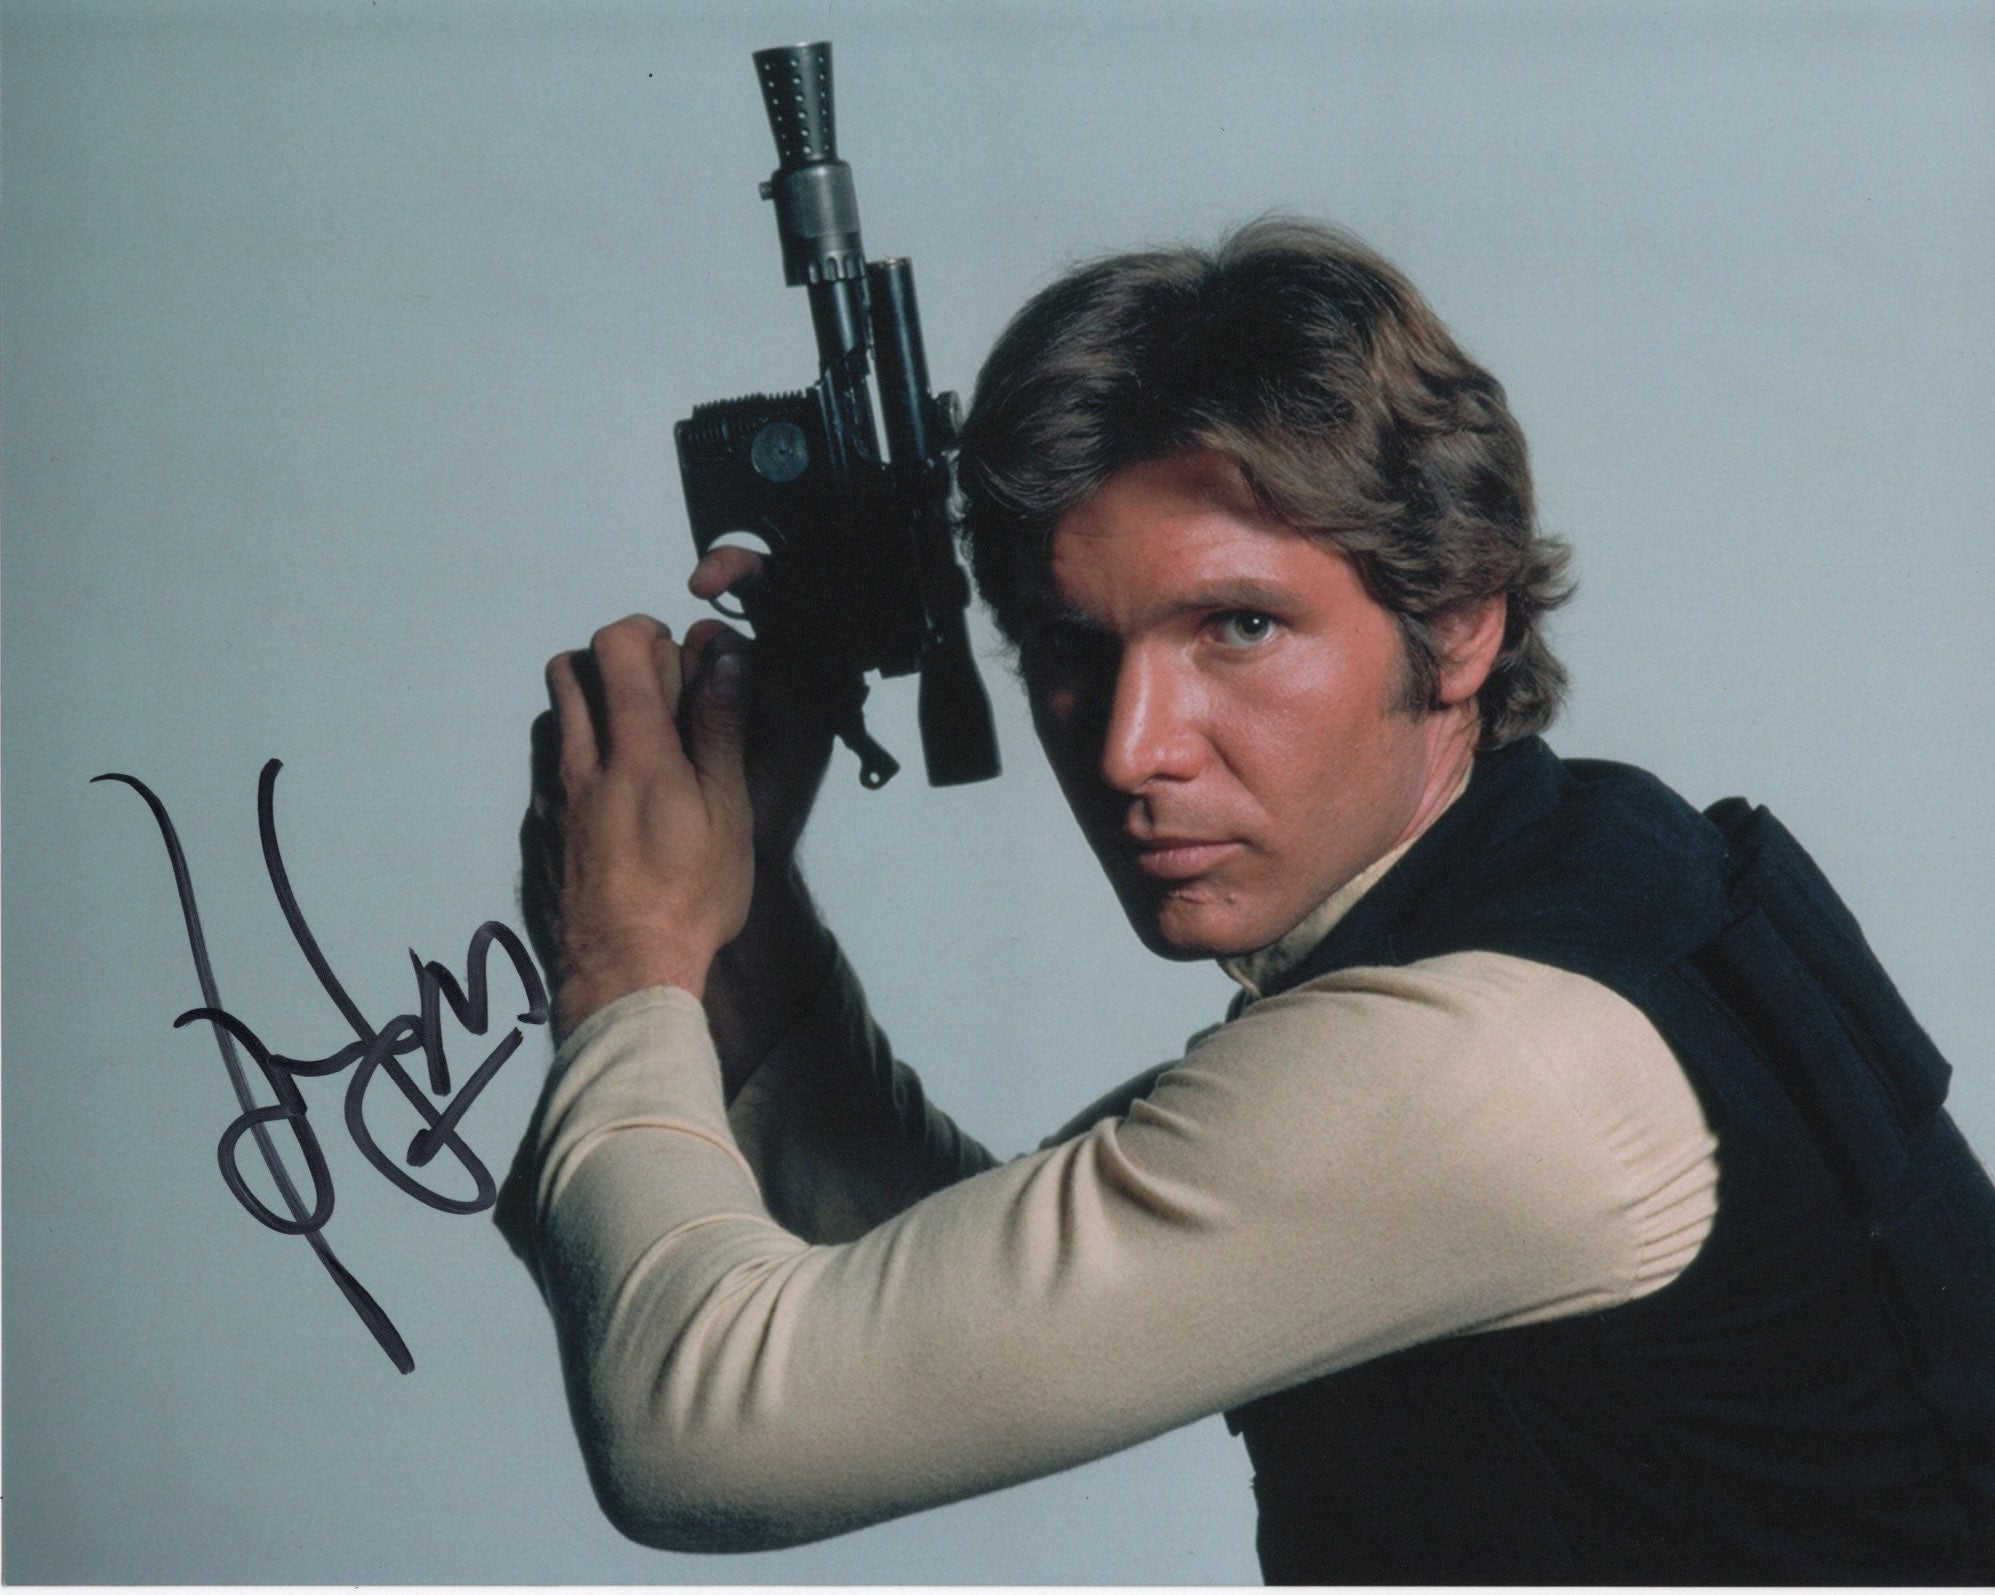 Harrison Ford Star Wars Signed Autograph 8x10 Photo ACOA